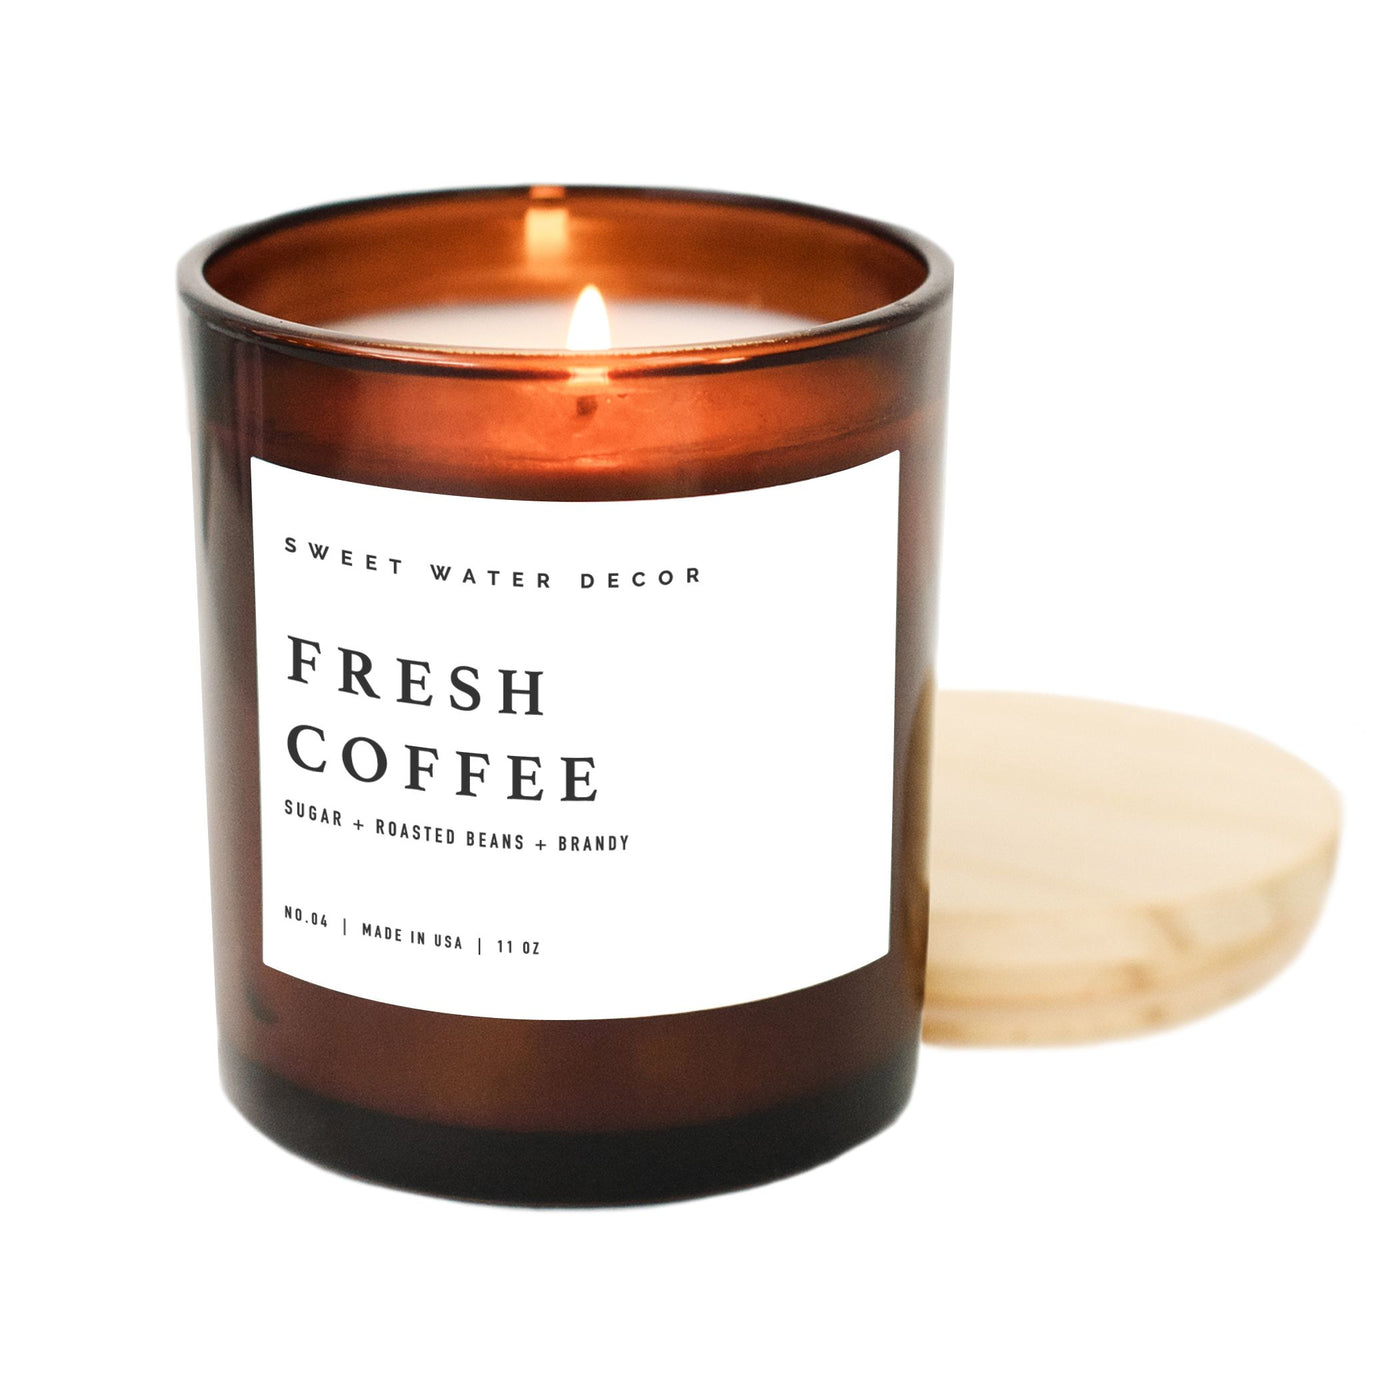 Fresh Coffee Soy Candle - Amber Jar - 11 oz - Sweet Water Decor - Candles